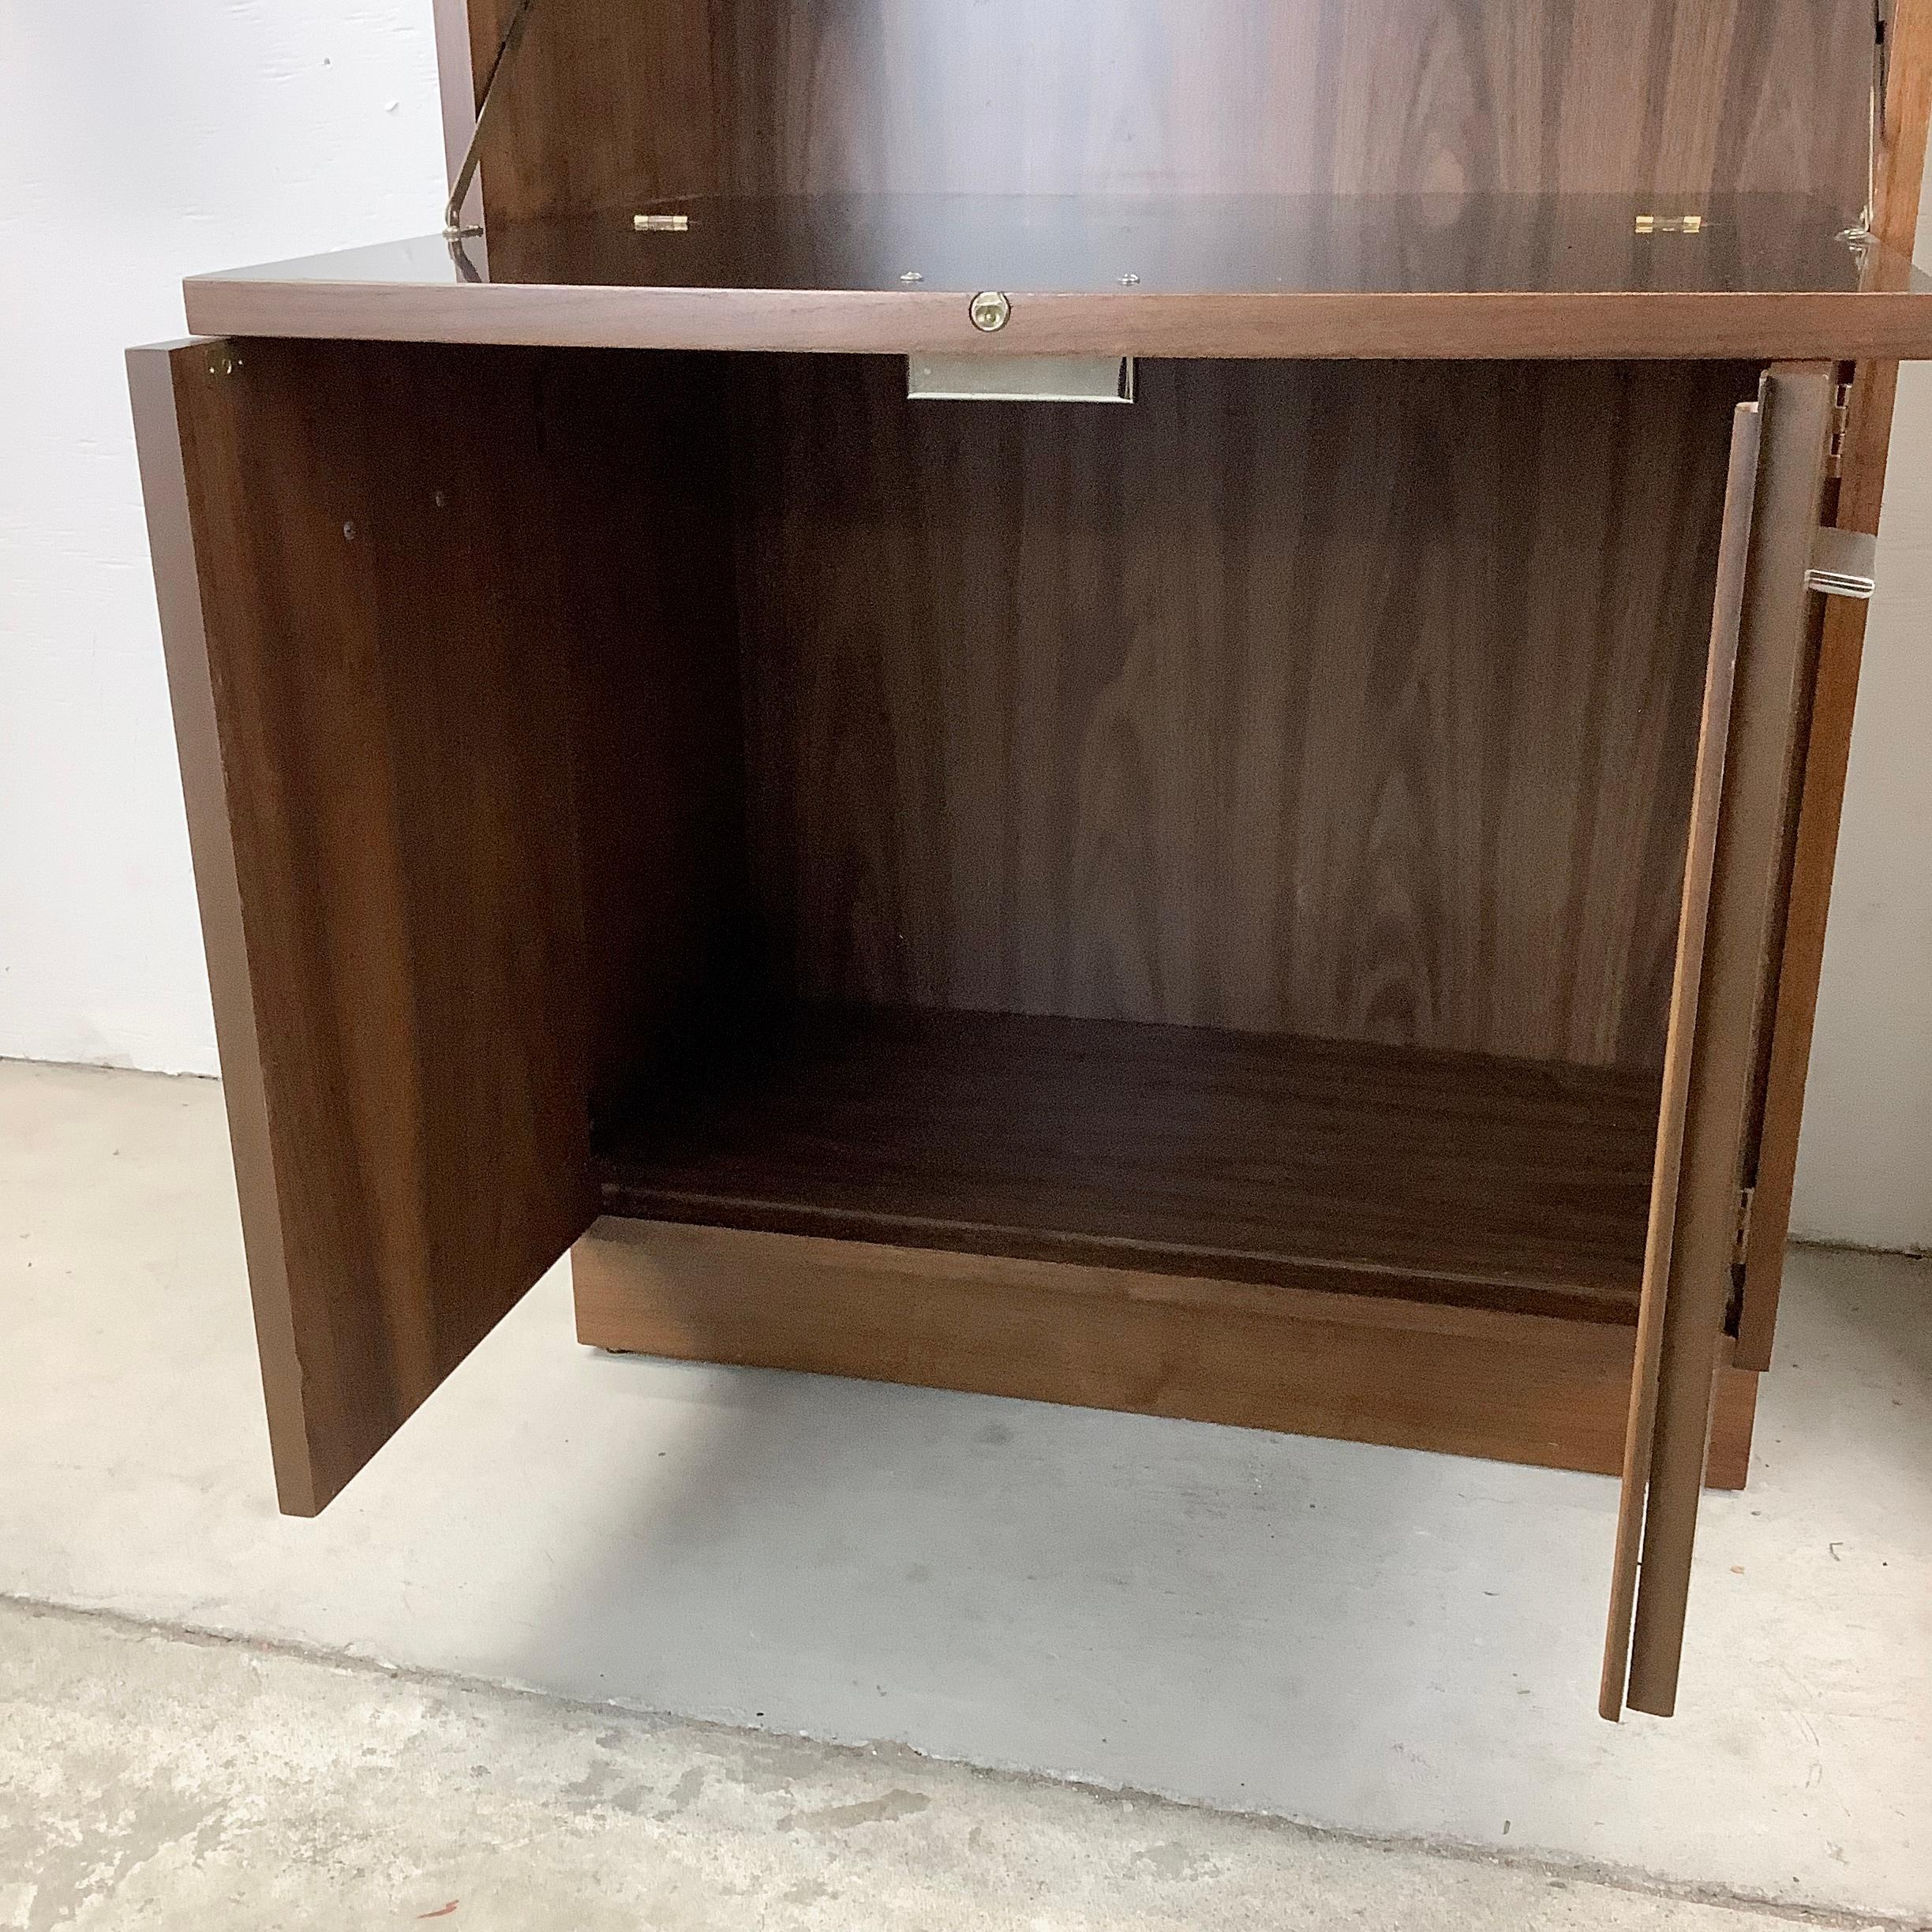 Other Tall Vintage Bookshelves With Drop Front Cabinet & Drawers For Sale